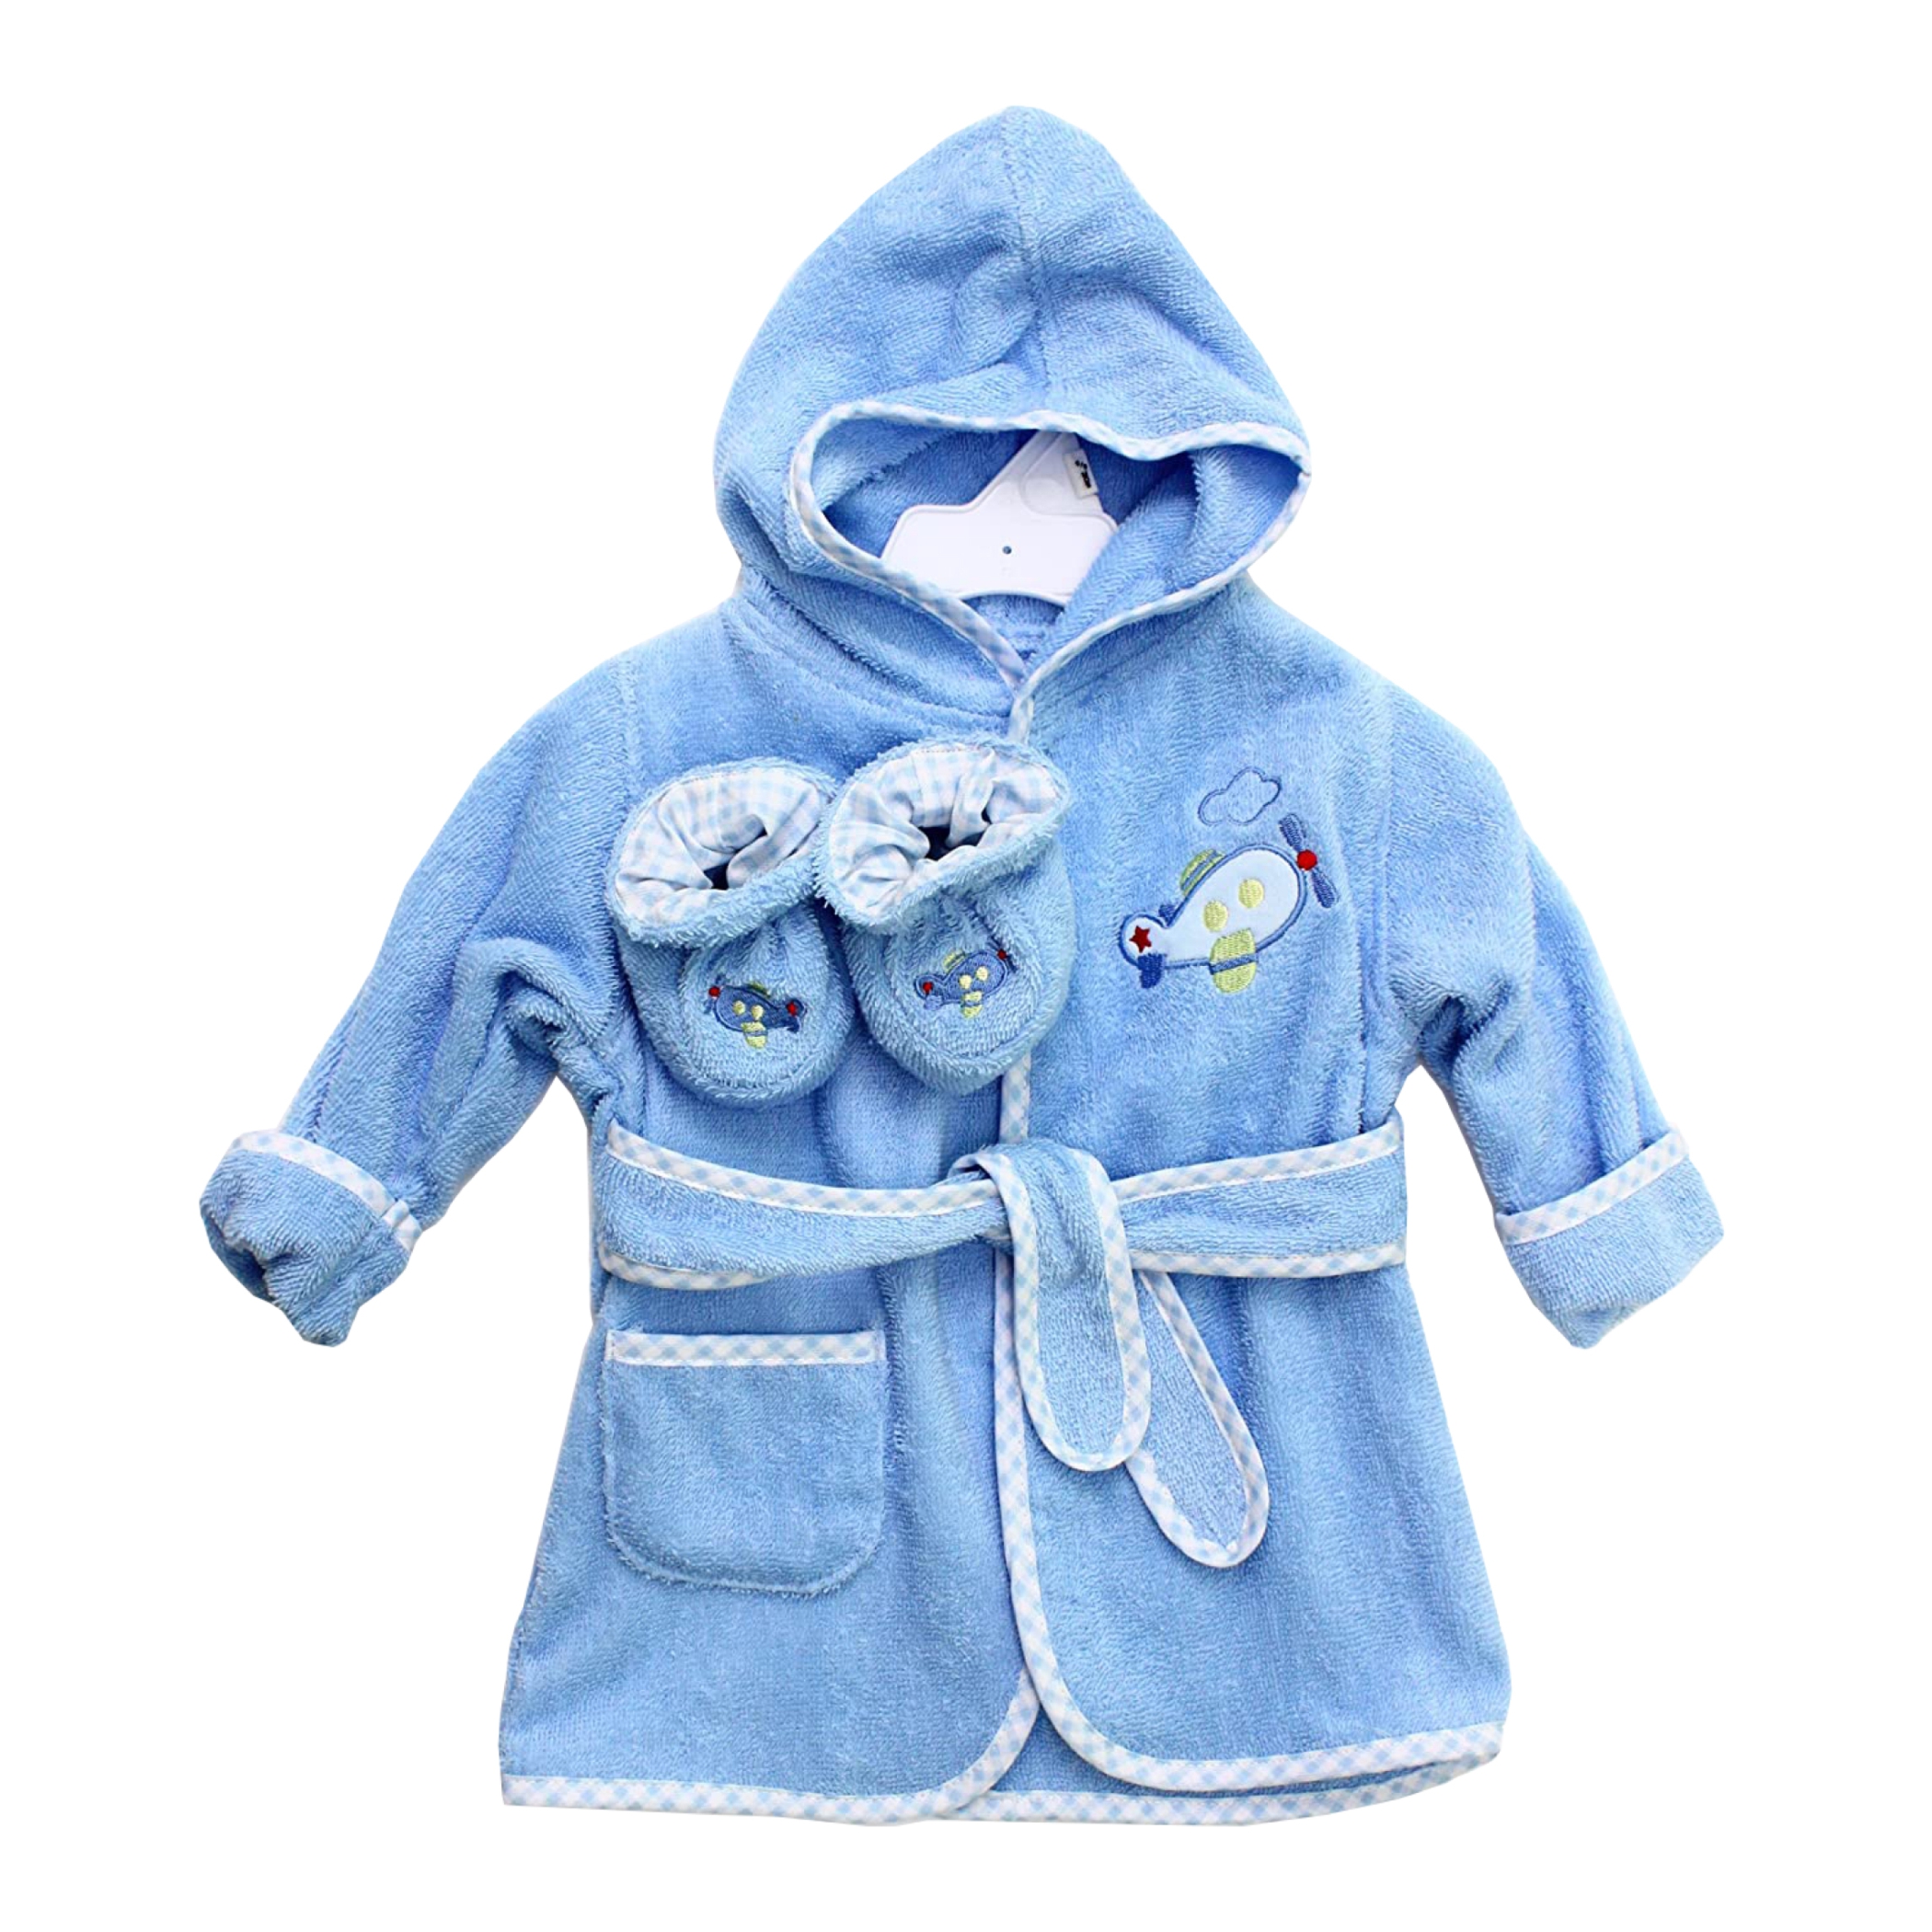 Spasilk Baby Hooded Bathrobe with Booties, Cotton Terry Bath Set for Newborns and Infants, Blue Plane - image 1 of 7